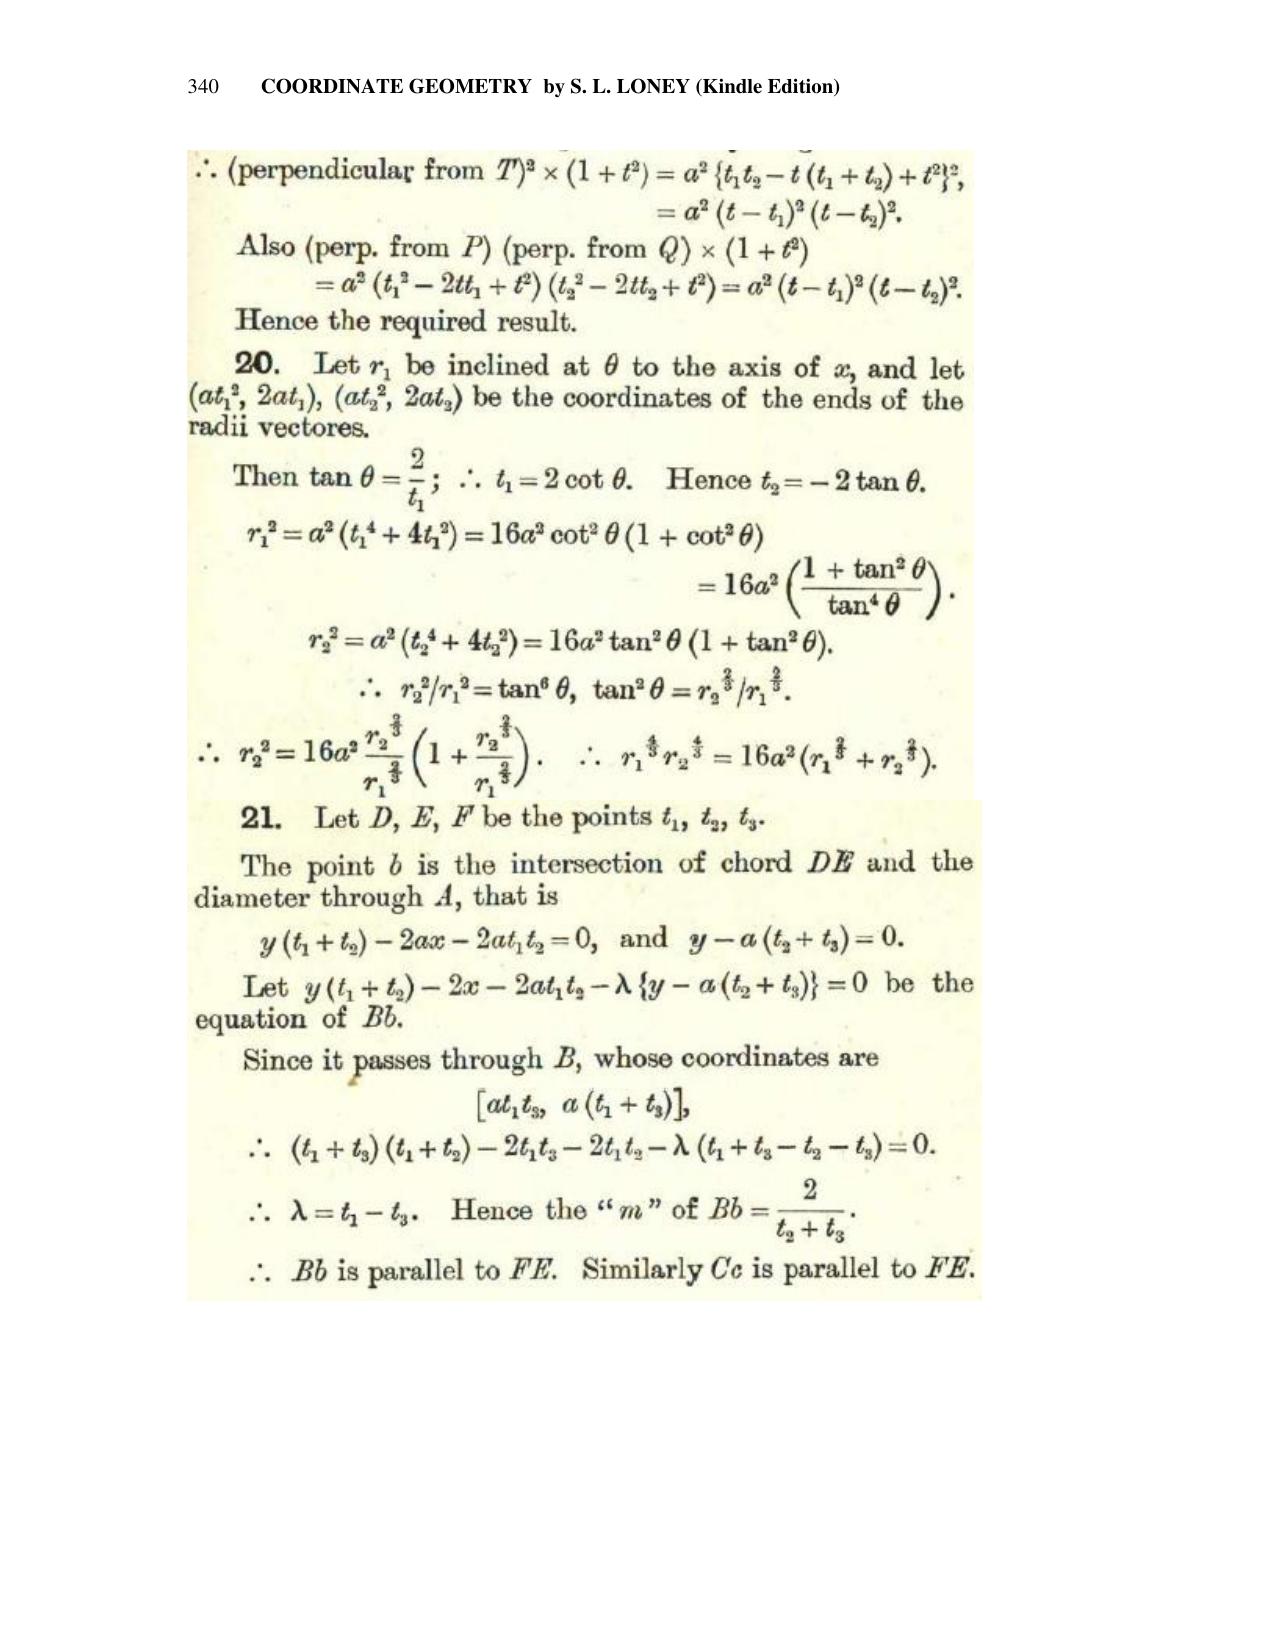 Chapter 10: The Parabola - SL Loney Solutions: The Elements of Coordinate Geometry - Page 54